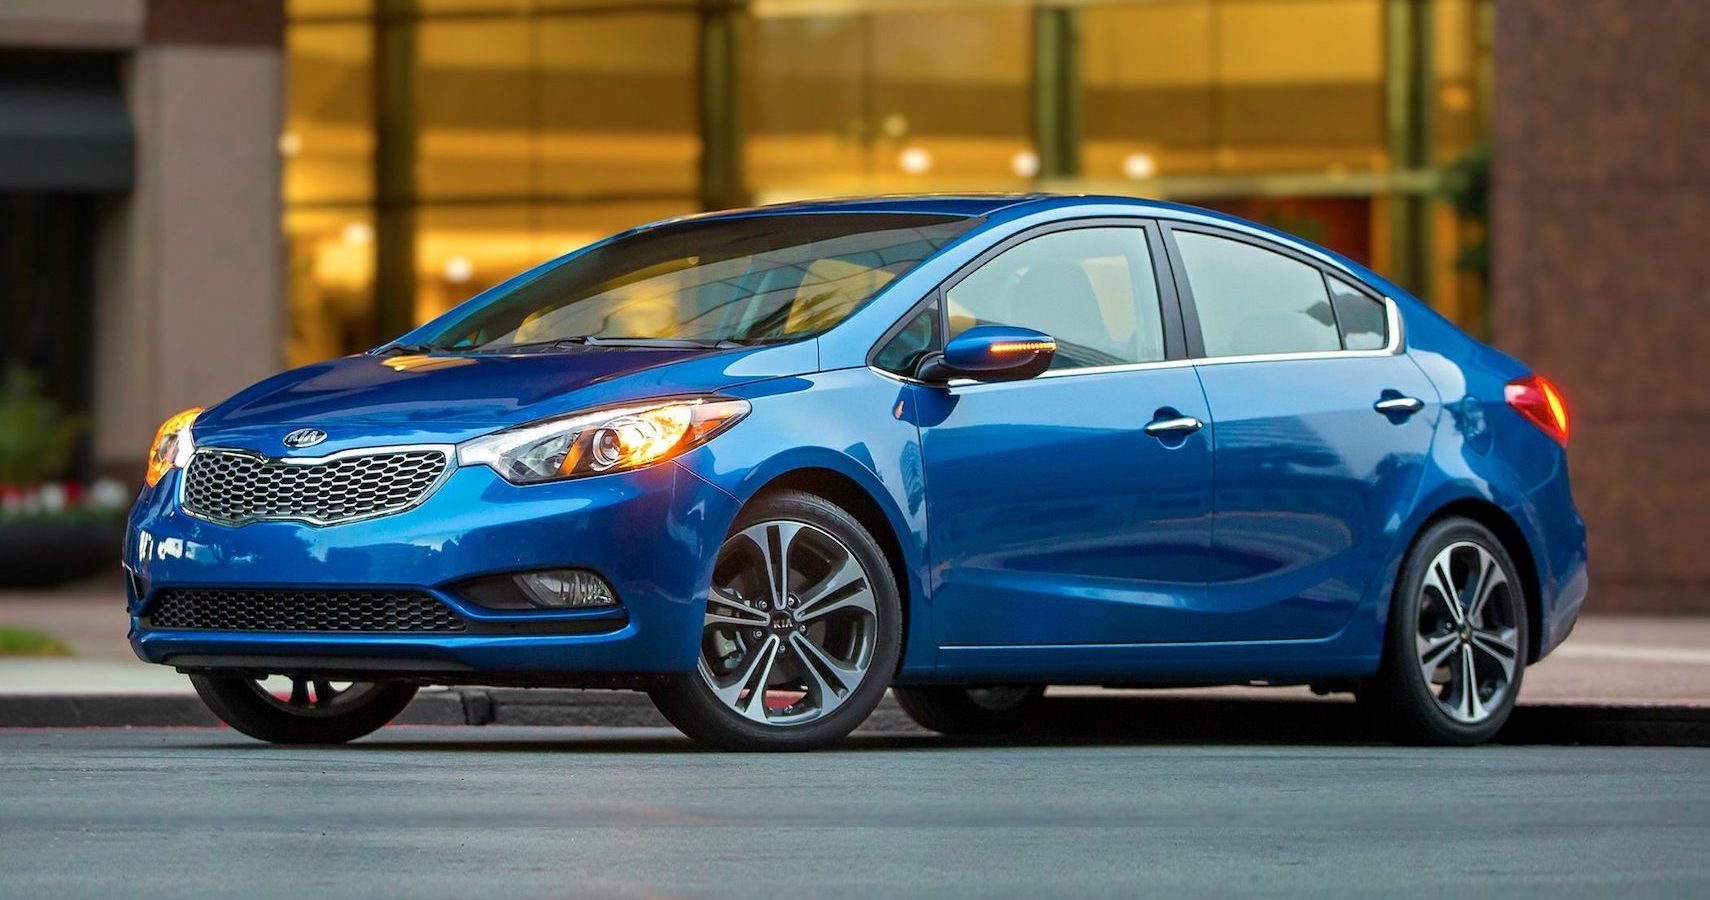 13 Glaring Problems With Kia Cars No One Tells You About